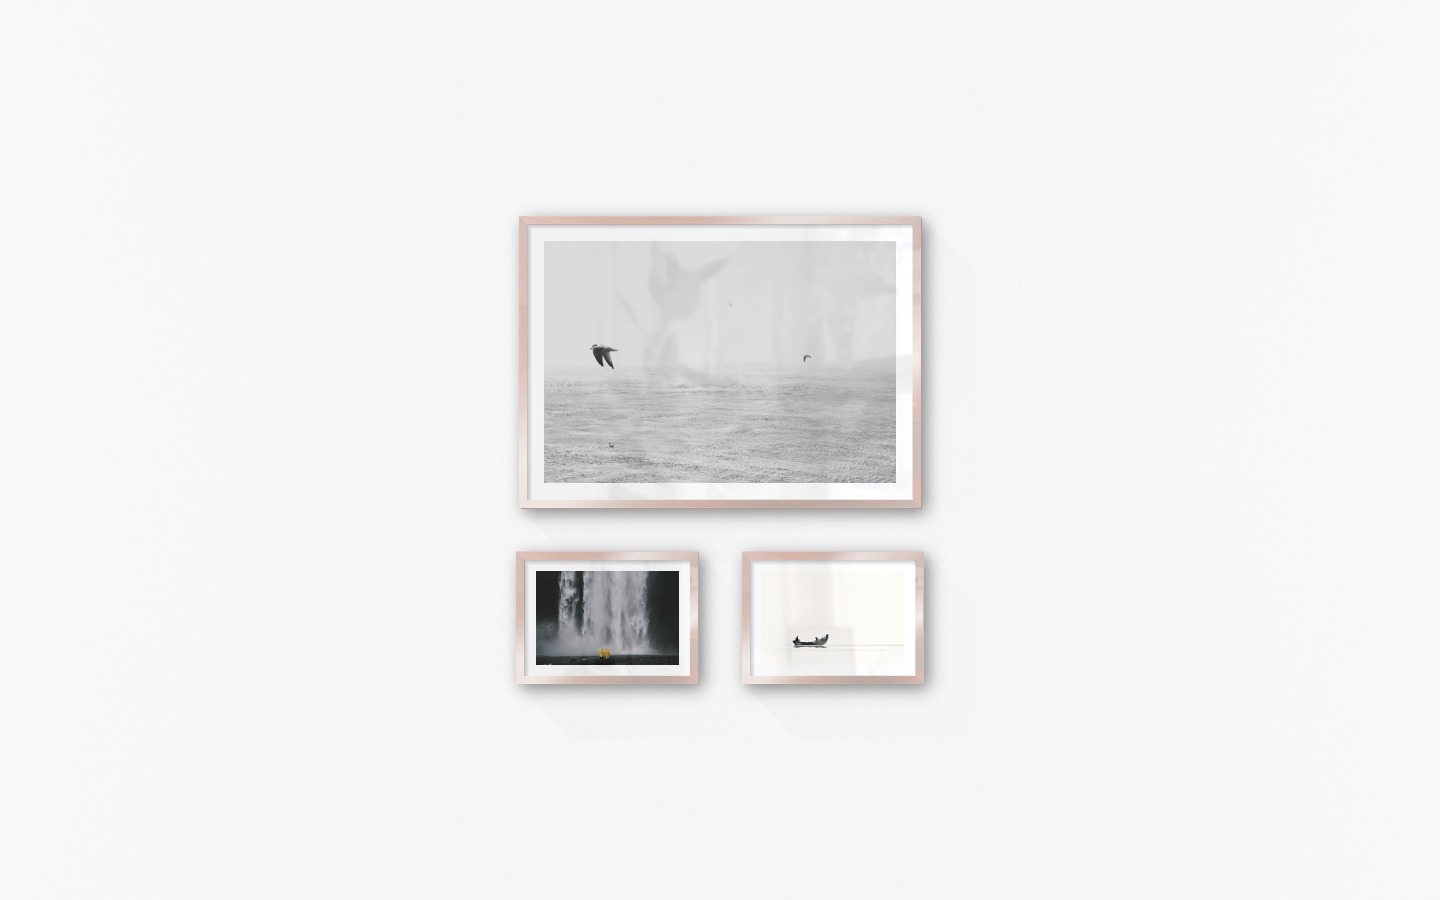 Gallery wall with picture frames in copper in sizes 50x70 and 21x30 with prints "Birds over the sea", "Waterfall with people" and "People in boat"